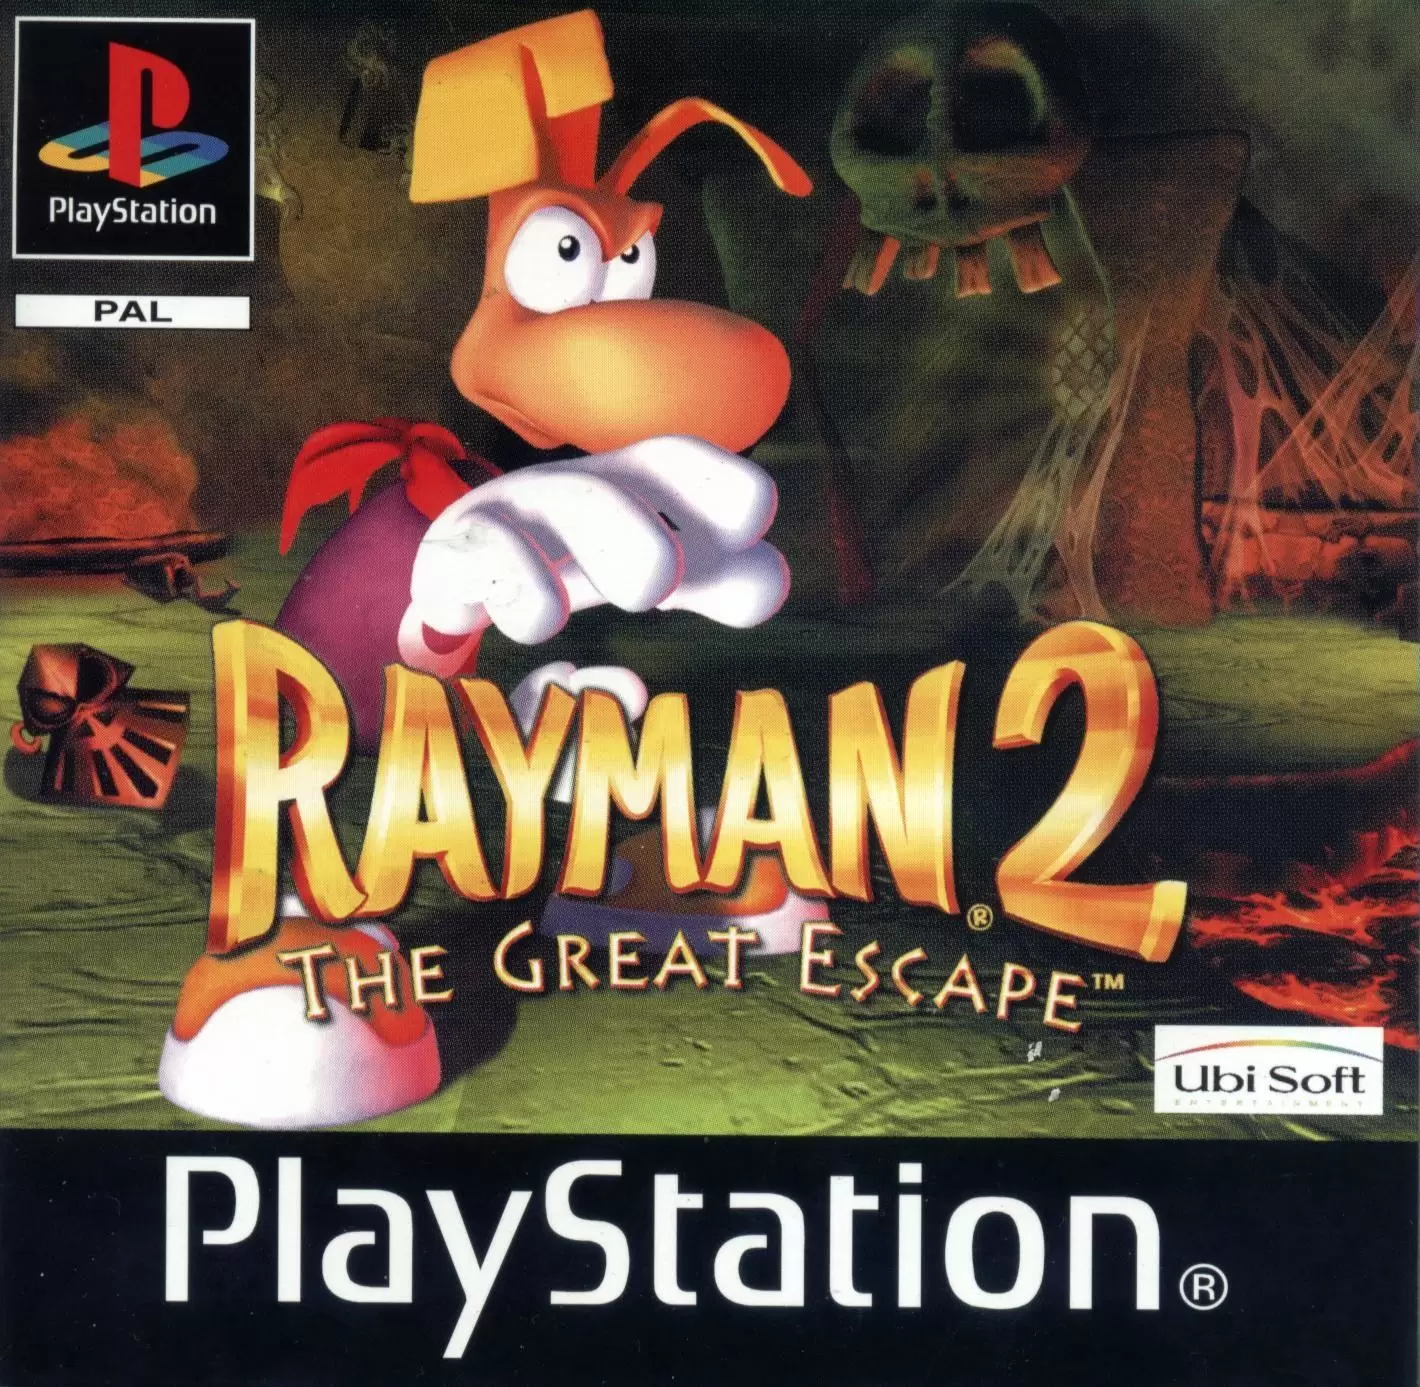 Playstation games - Rayman 2: The Great Escape